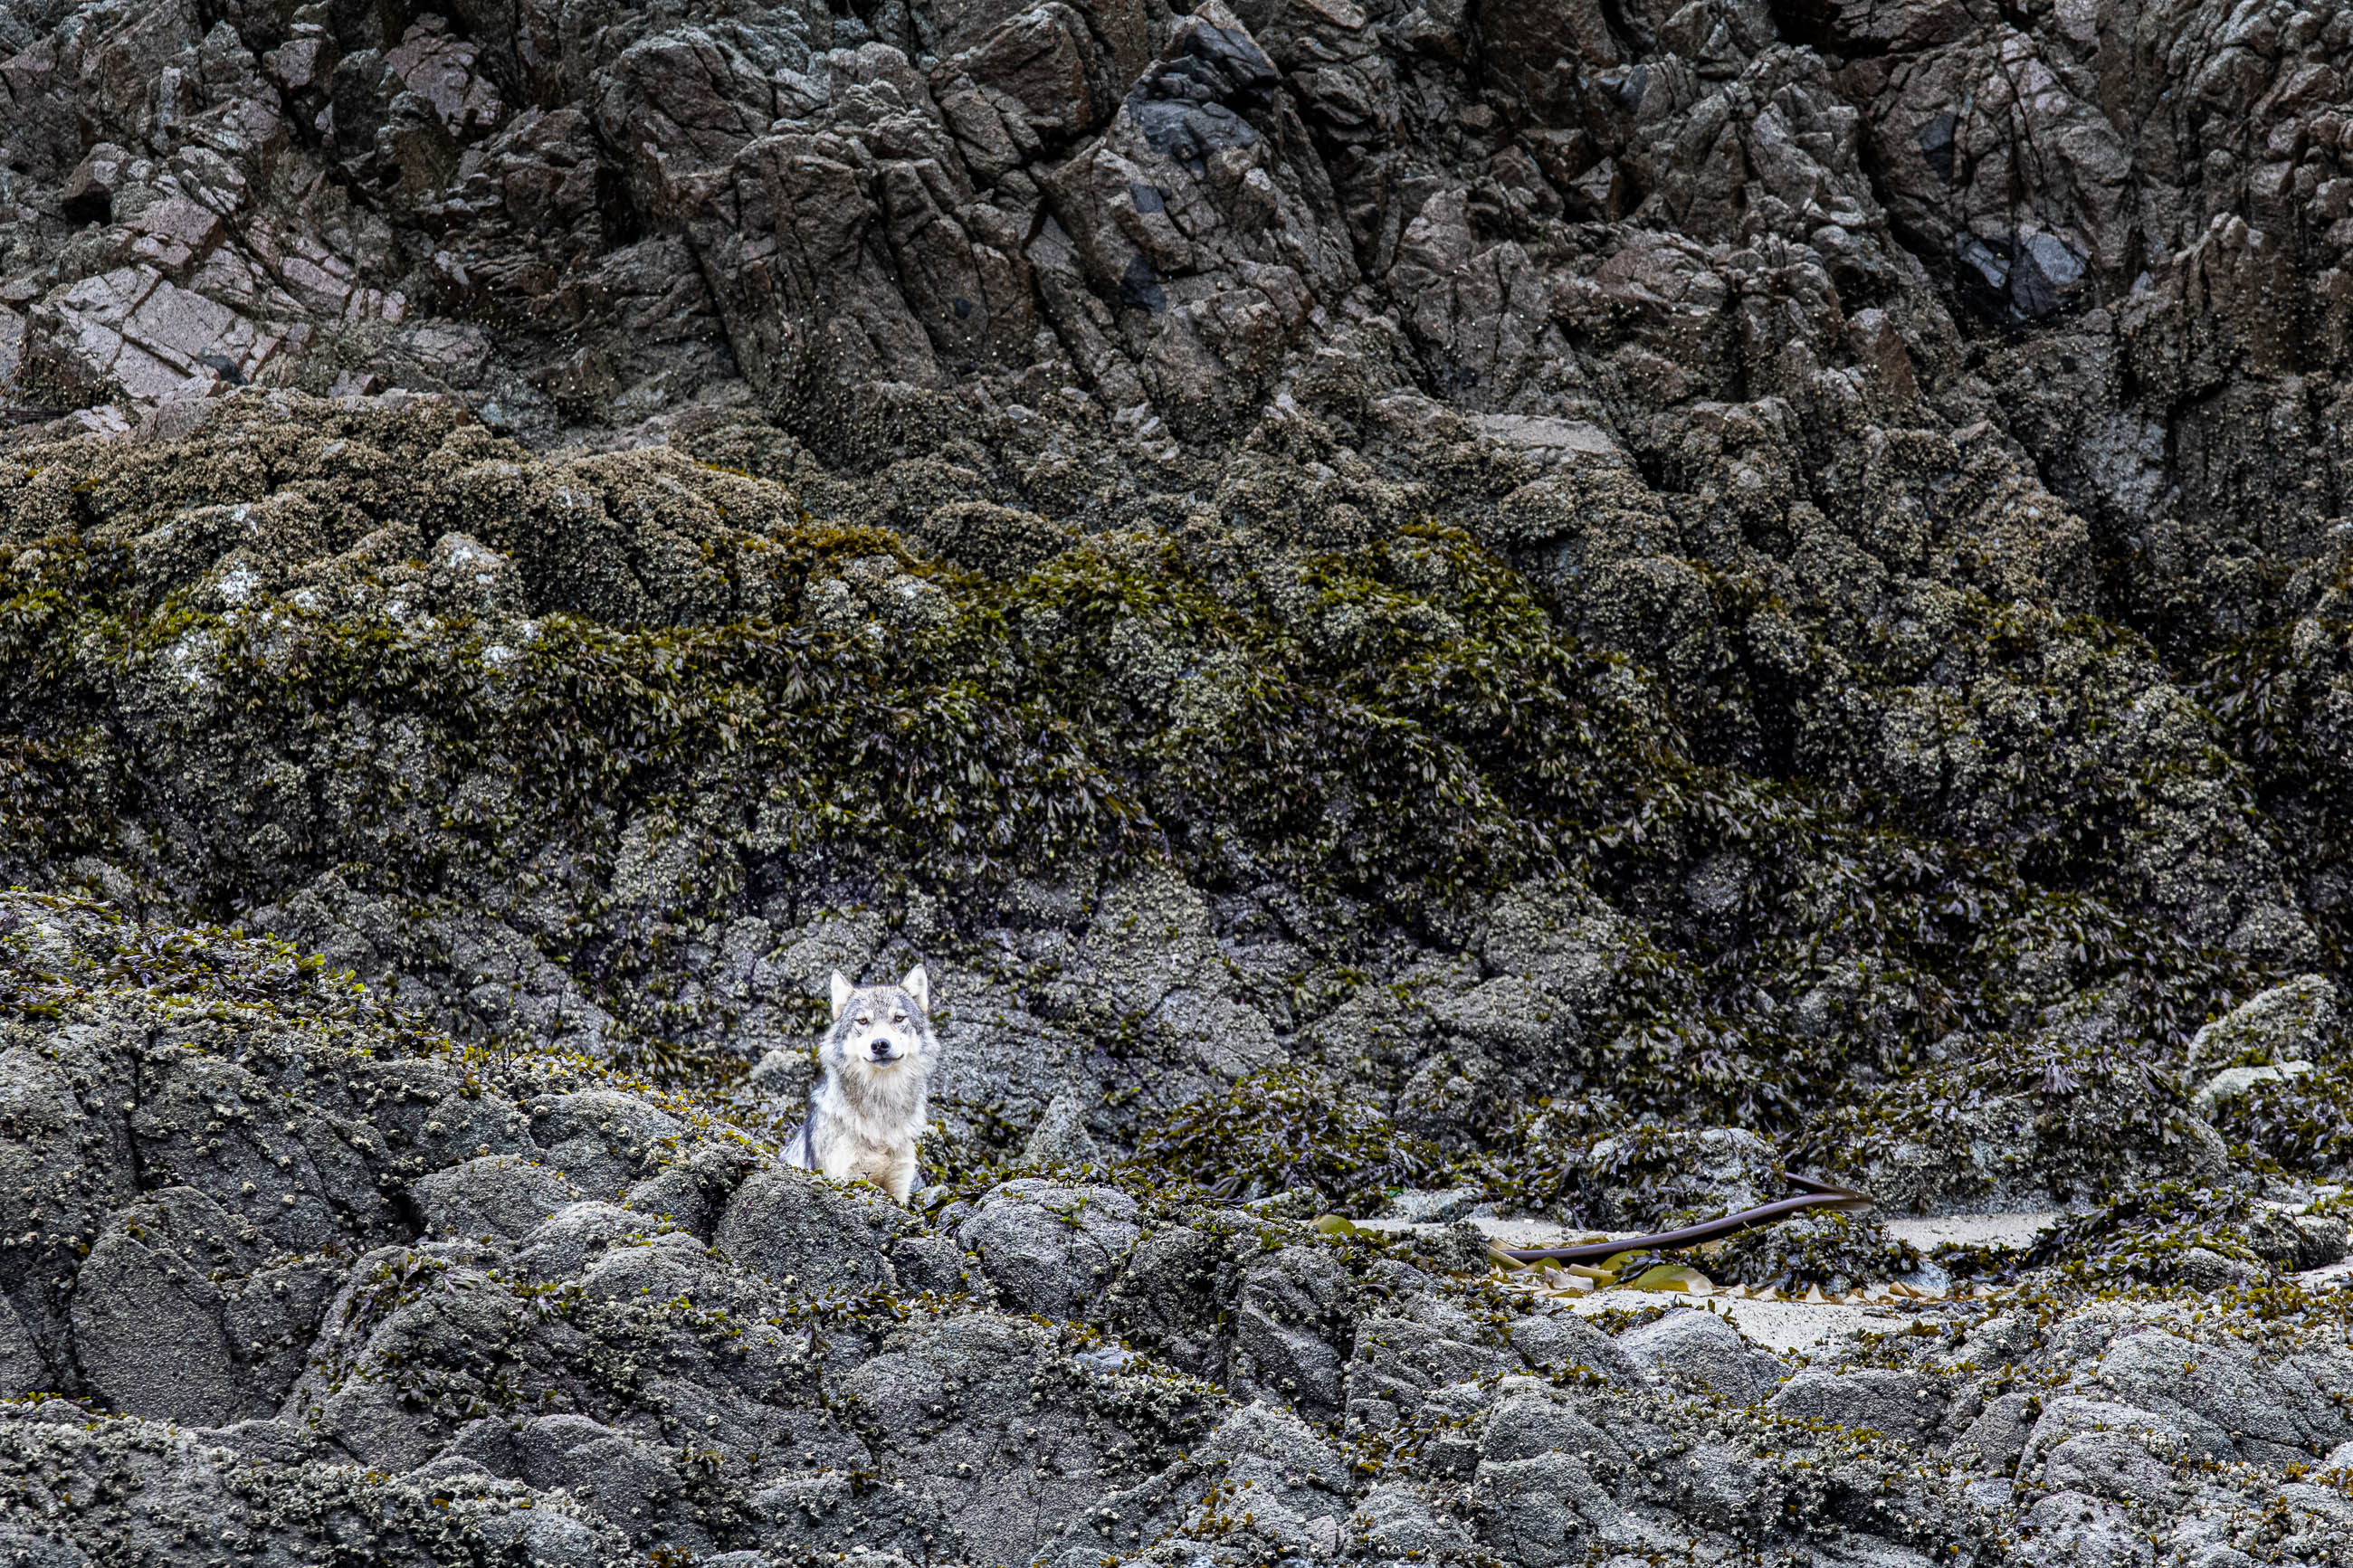 A sea wolf at the bottom of a cliff (Great Bear Rainforest, British Columbia, Canada)